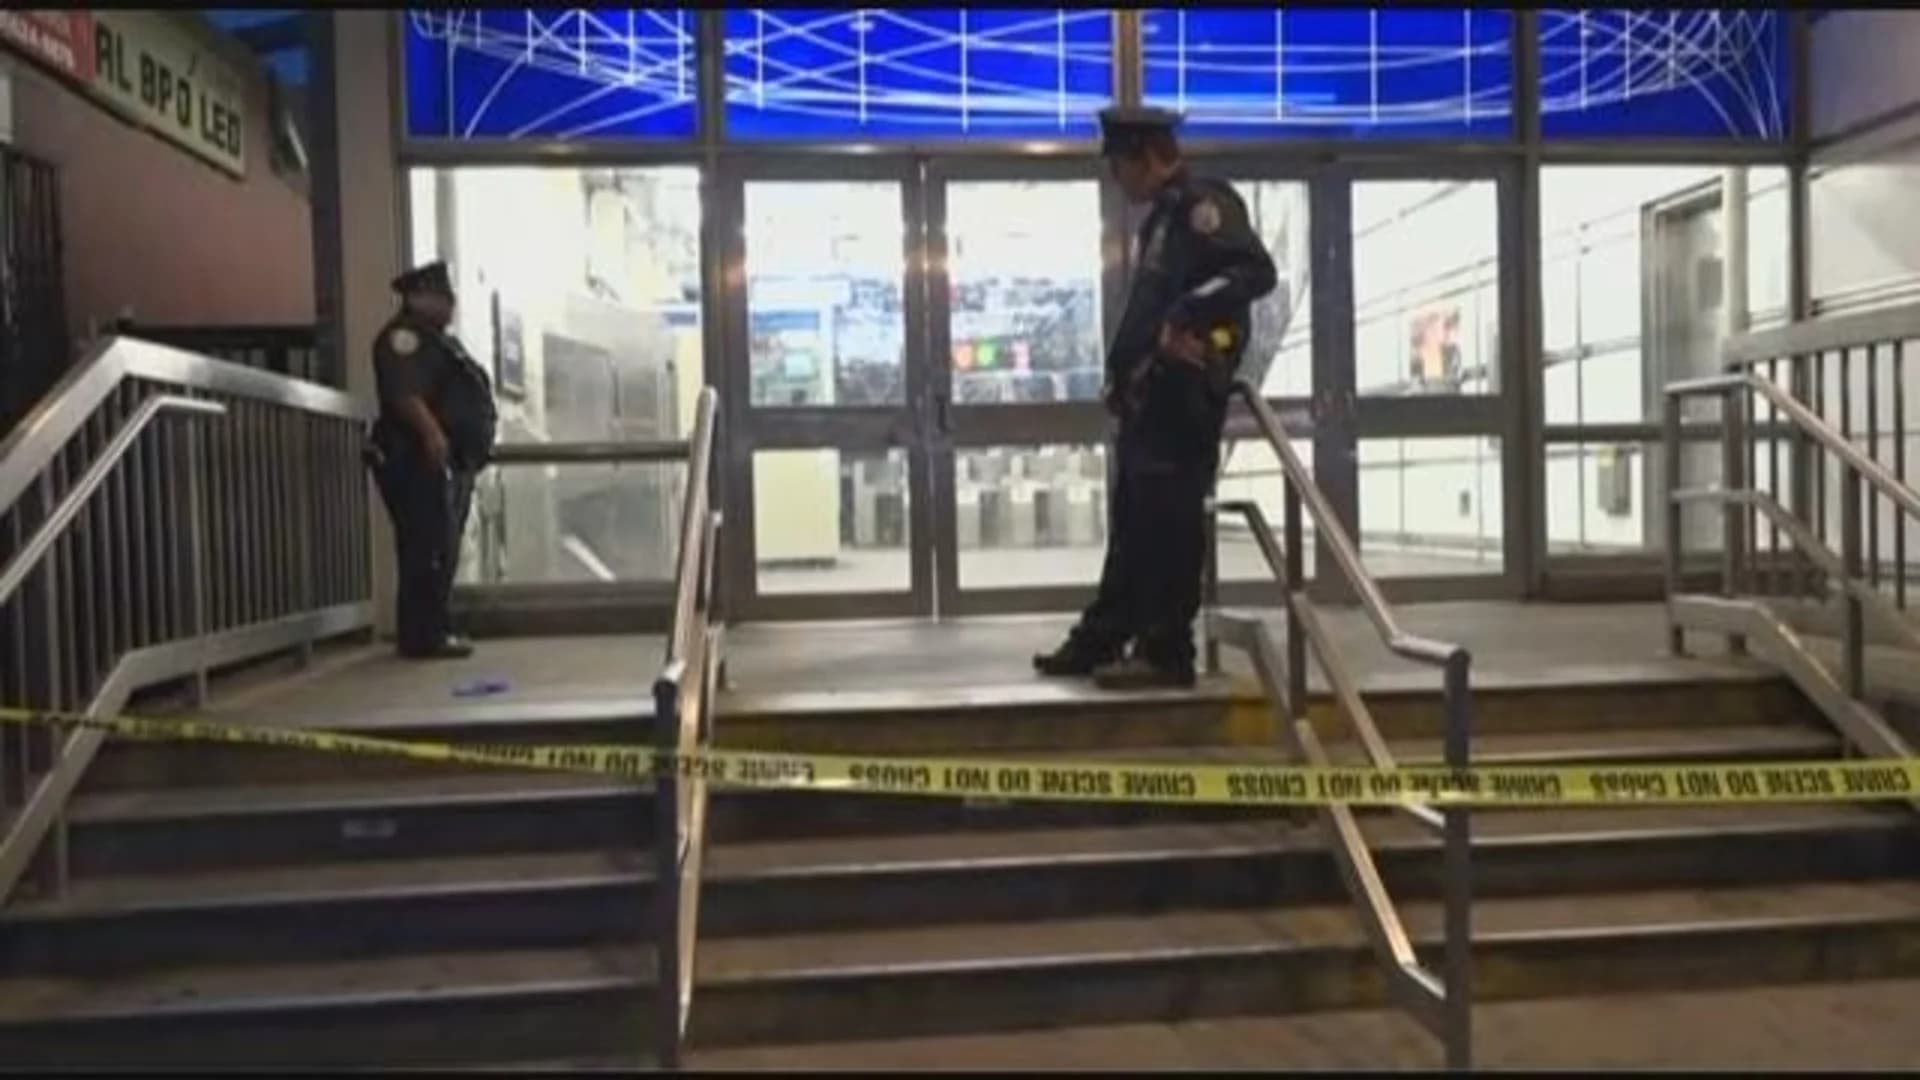 Man slashed across face and legs in subway station